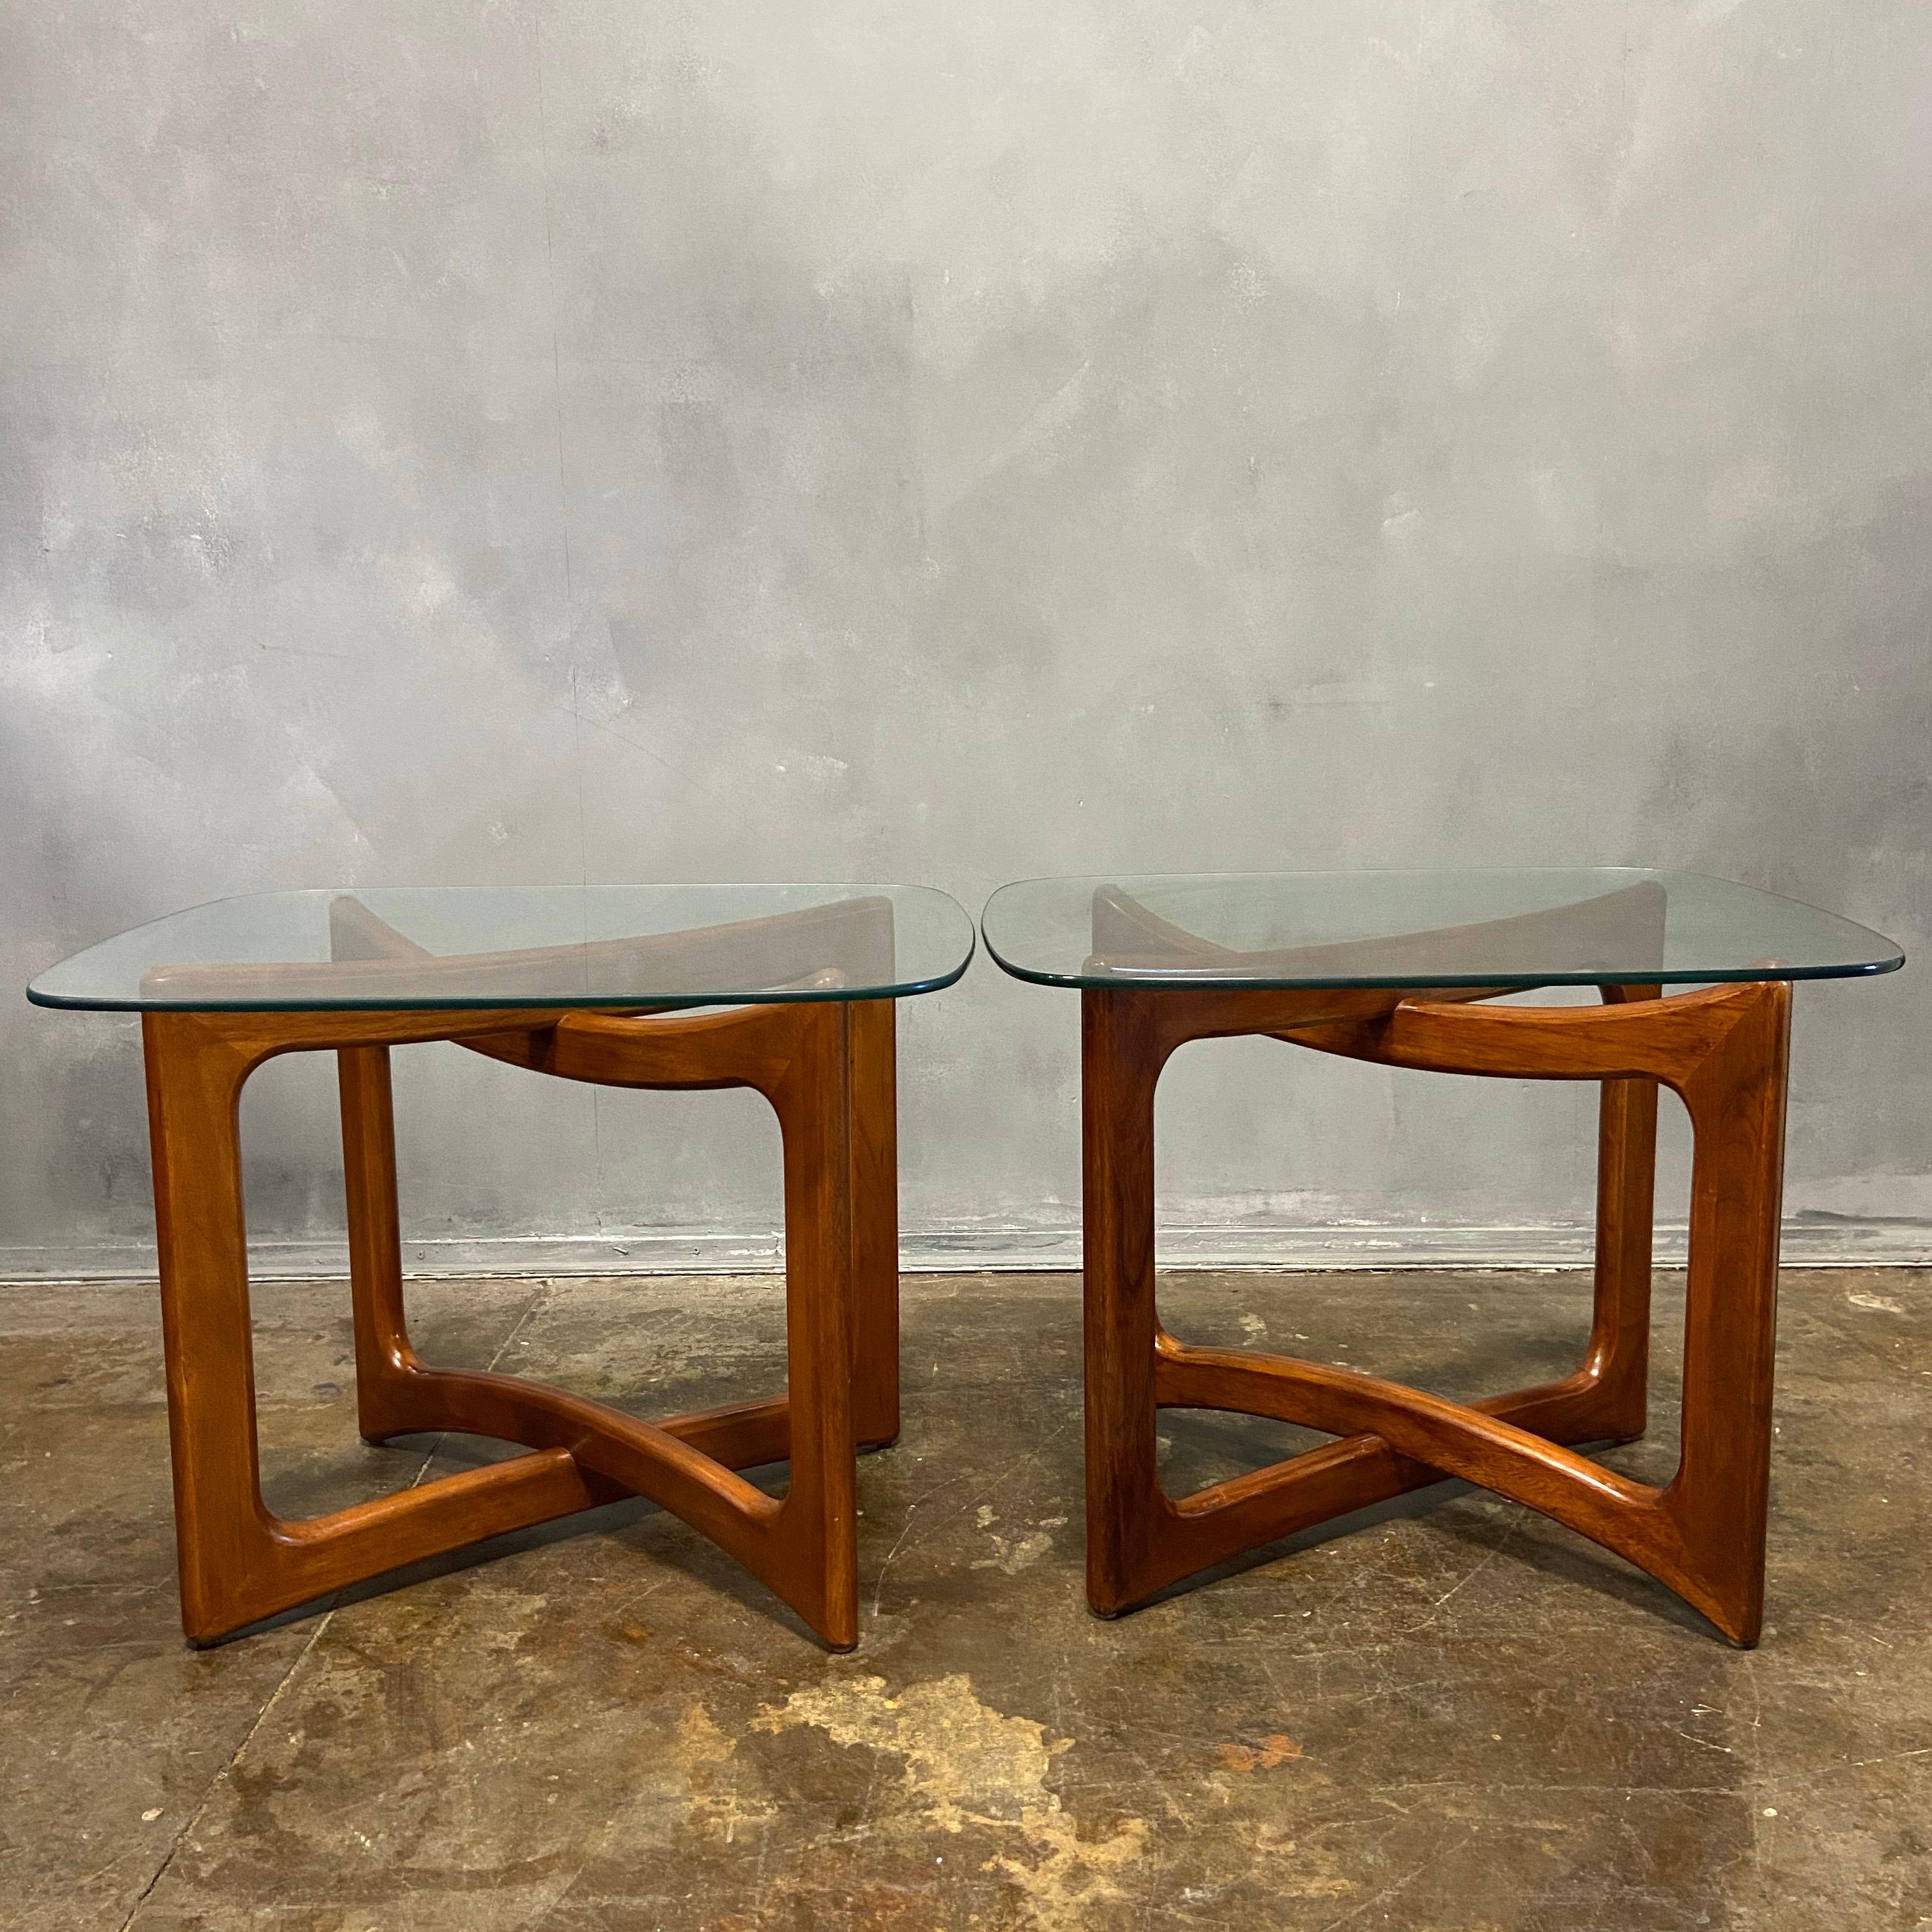 For your consideration are these wonderful side or end tables by Pearsall. The base measures 21 inches wide and 16 1/2 inches deep. The height is 22 inches. The glass top is just less than half inch thick and is 28 x 22”. The glass top shows minimal